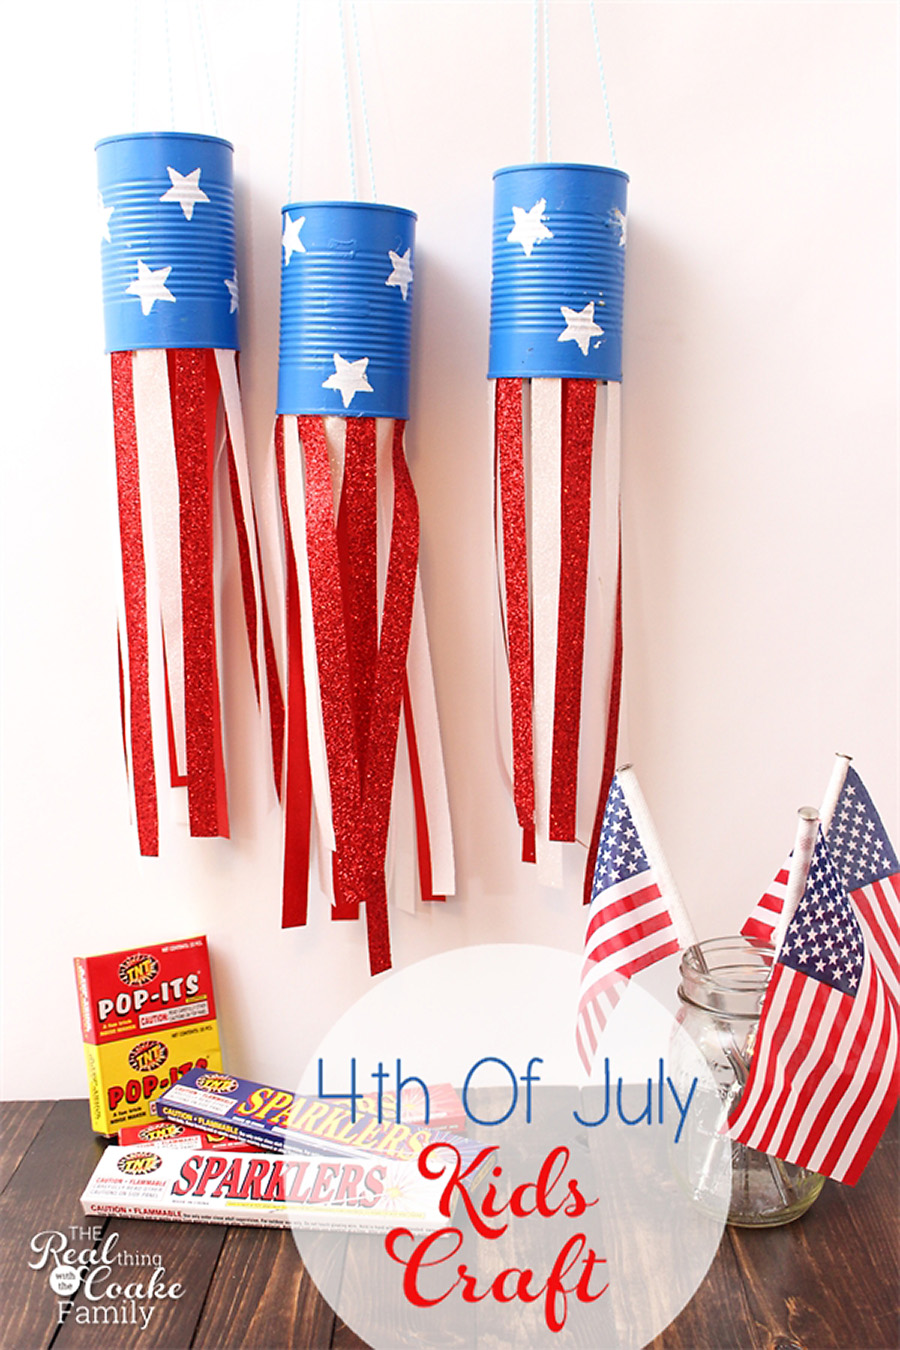 4th of July Activities for Kids